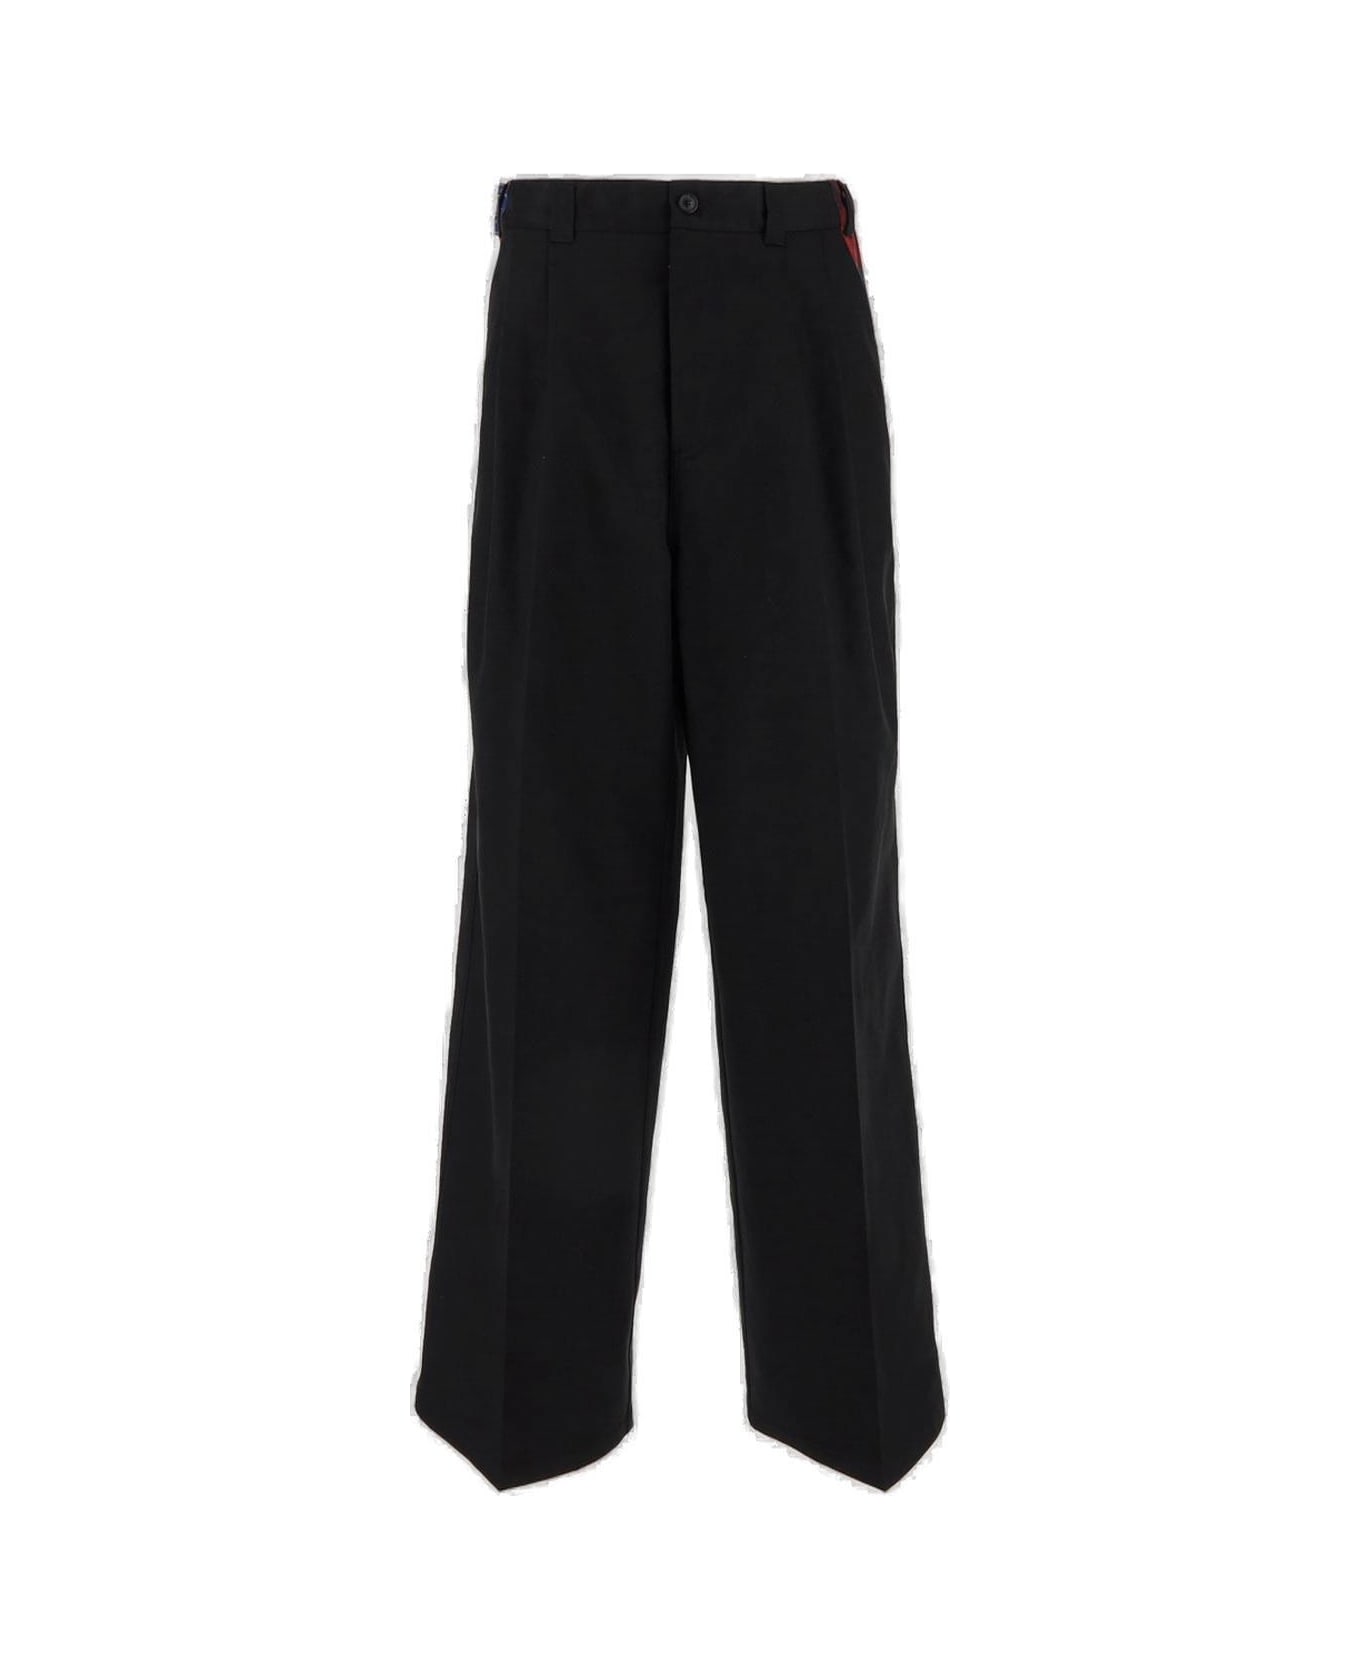 Maison Margiela Checkered Panelled Trousers double-breasted - BLACK